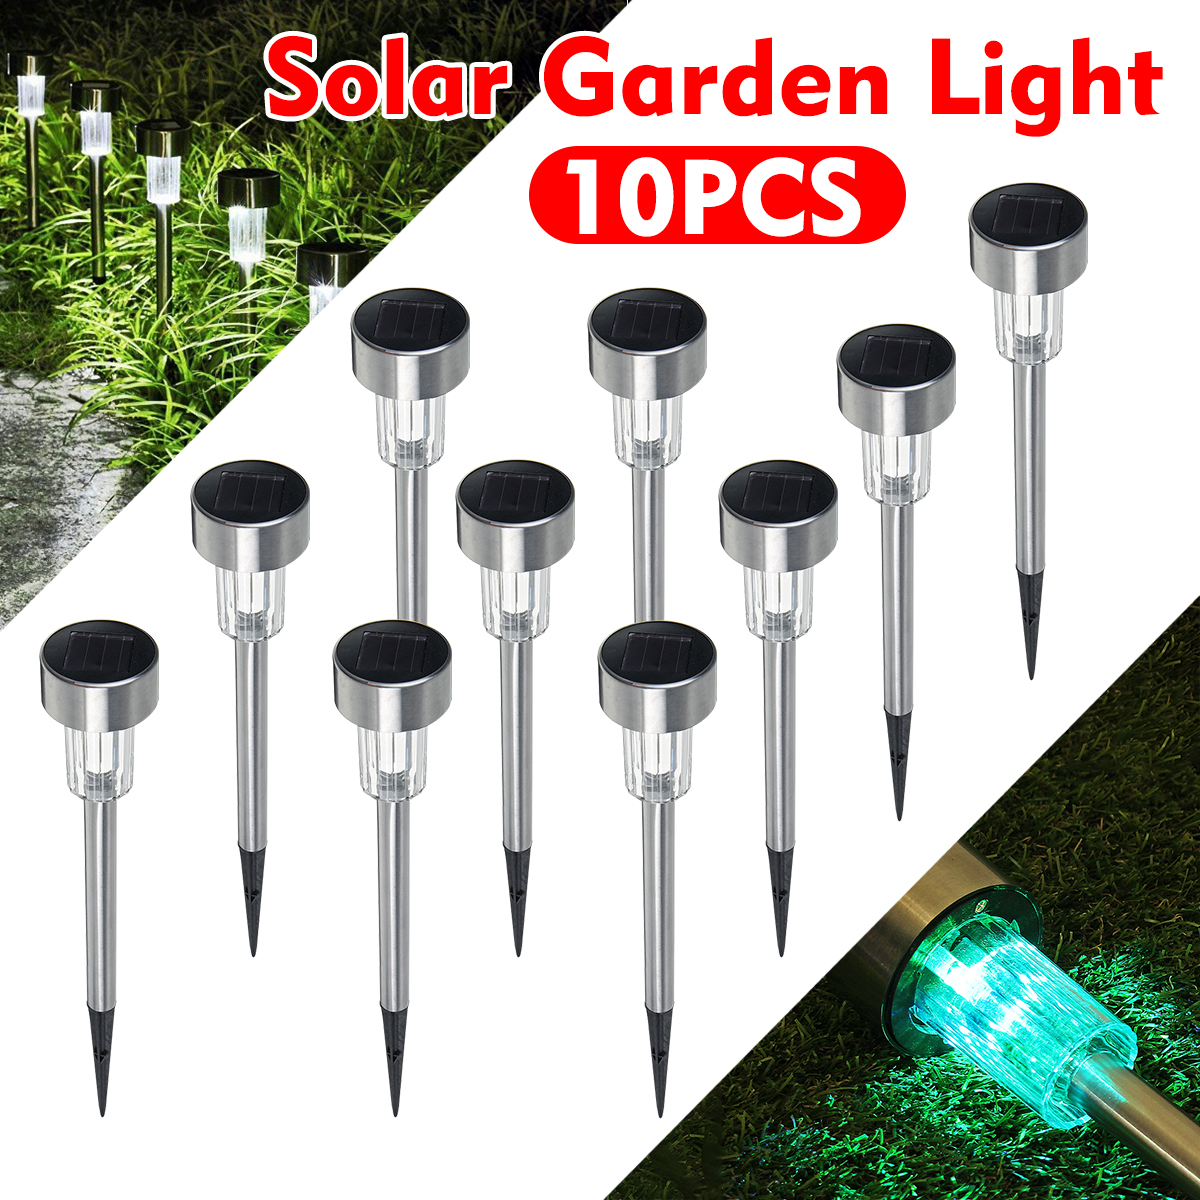 10PCS-Stainless-Steel-Solar-Powered-LED-Lawn-Light-Outdoor-Home-Garden-Decorative-Lamp-1712025-1